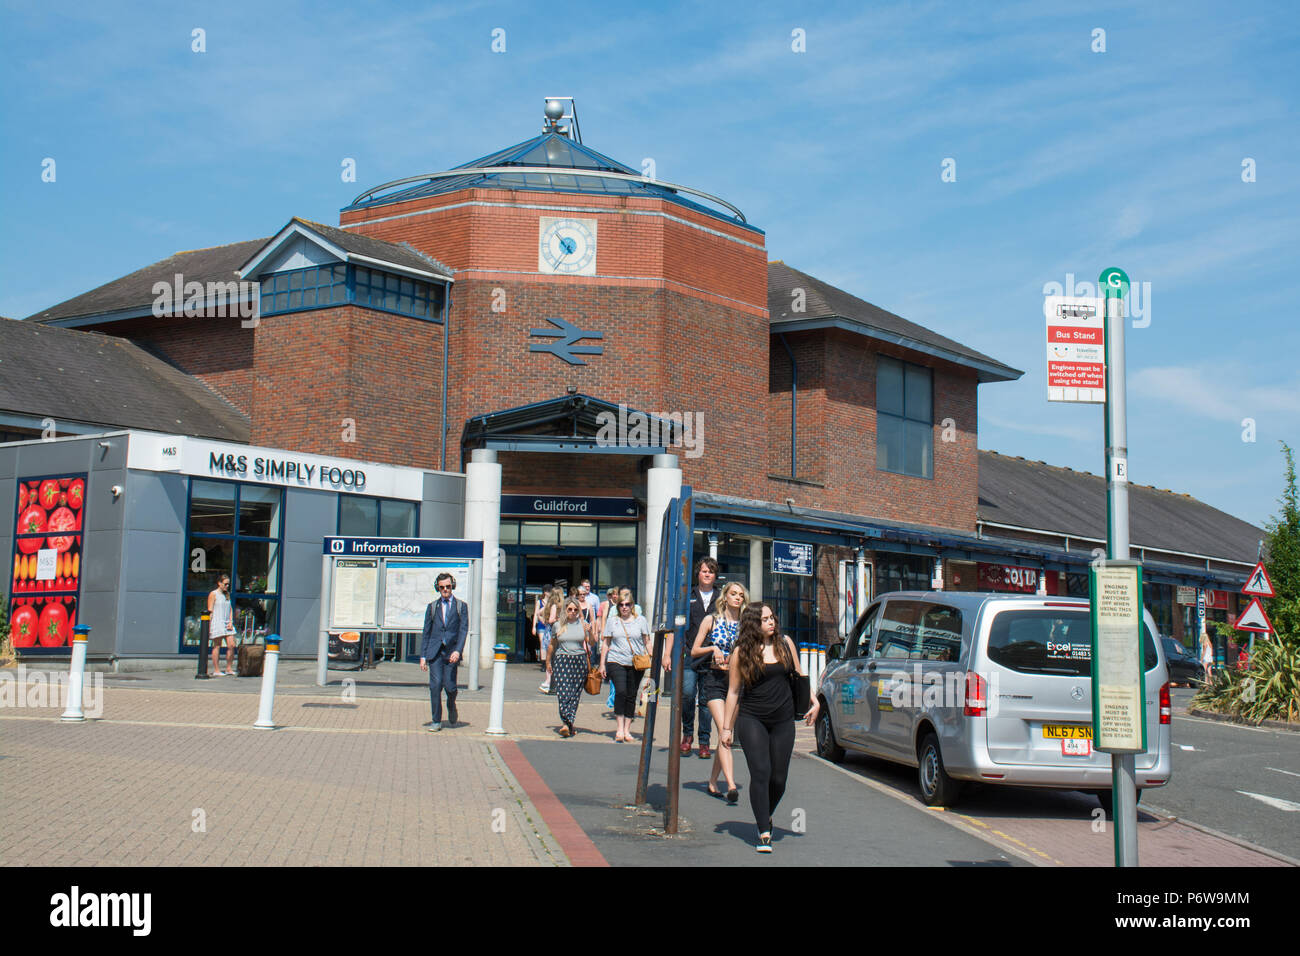 Outside the railway station in Guildford town, Surrey, UK Stock Photo